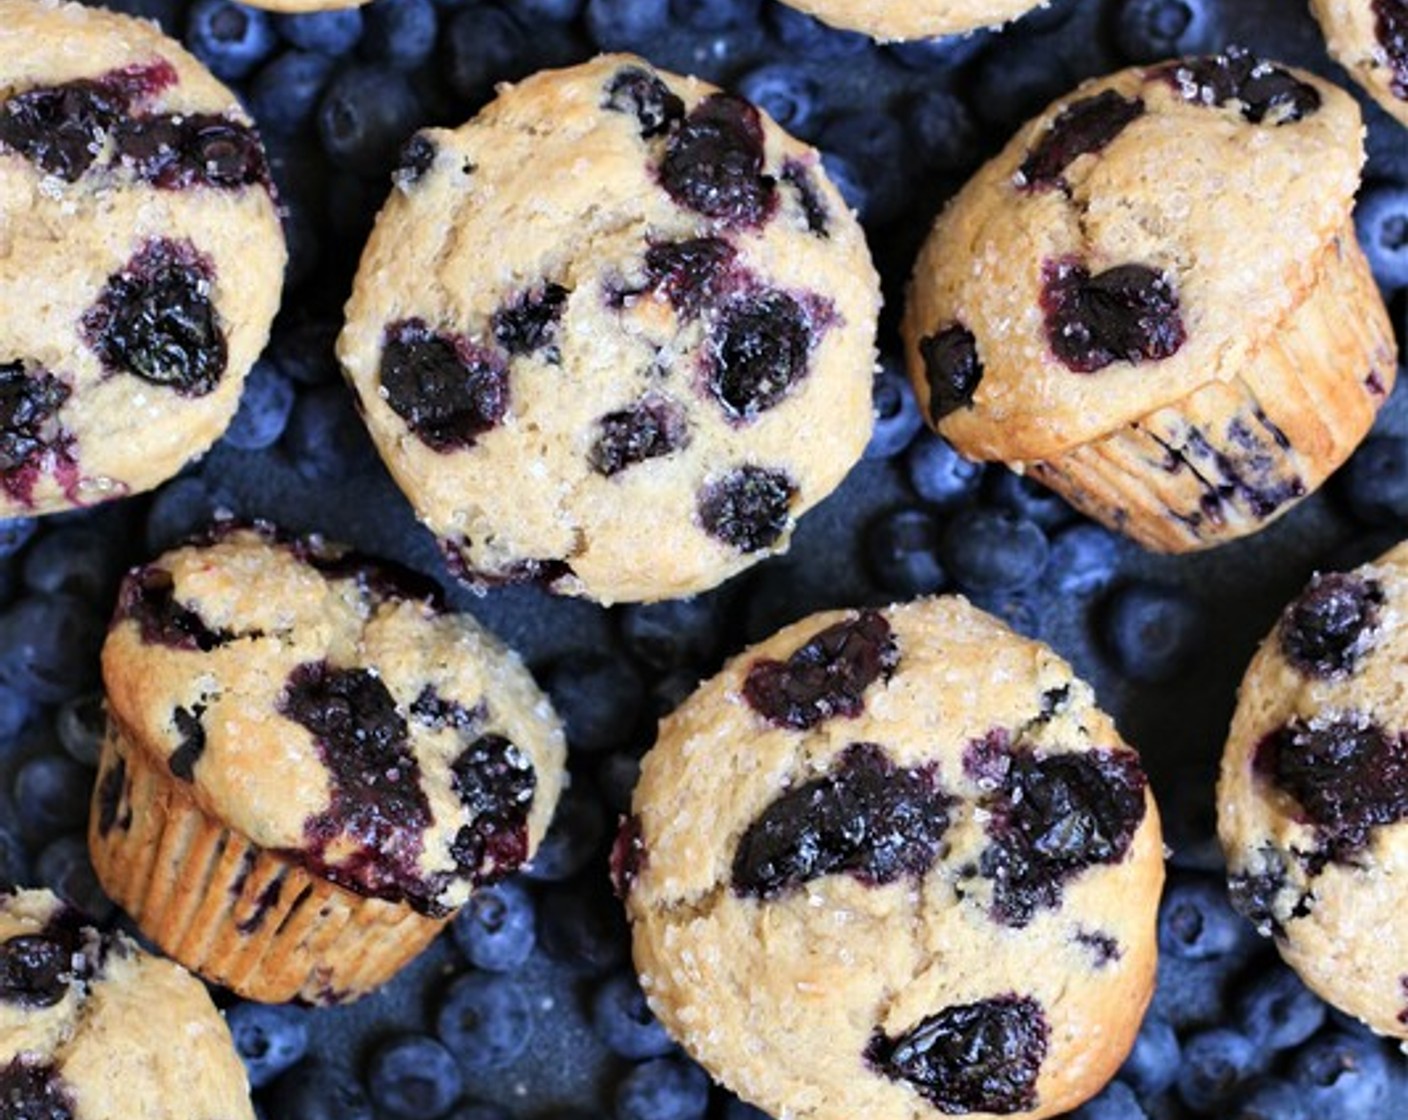 step 10 Cool muffins for at least 15 minutes in the pan before serving. Serve warm or at room temperature.